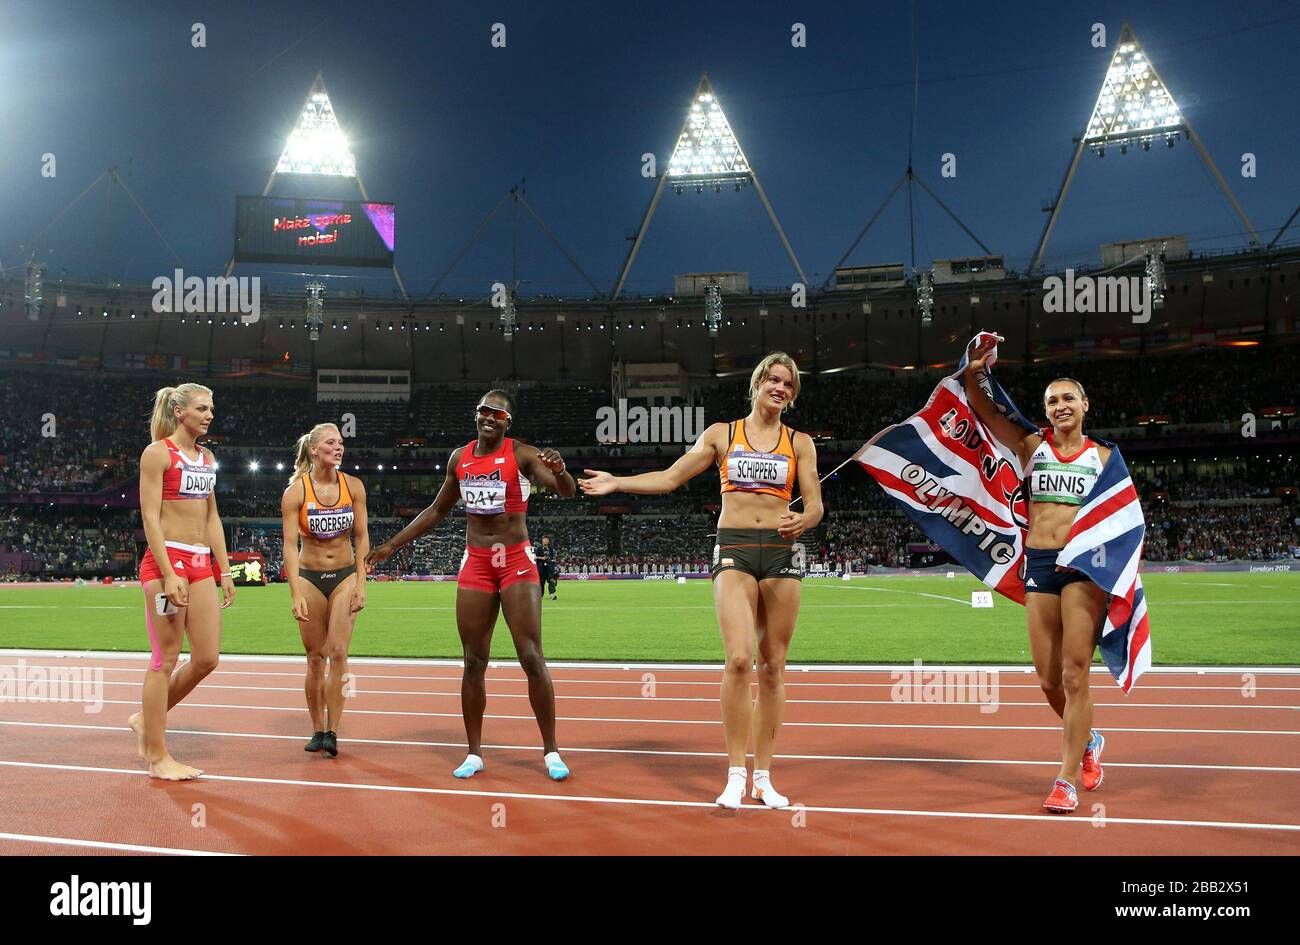 Great Britain's Jessica Ennis (far right) after winning the Heptathlon Gold Medal Stock Photo